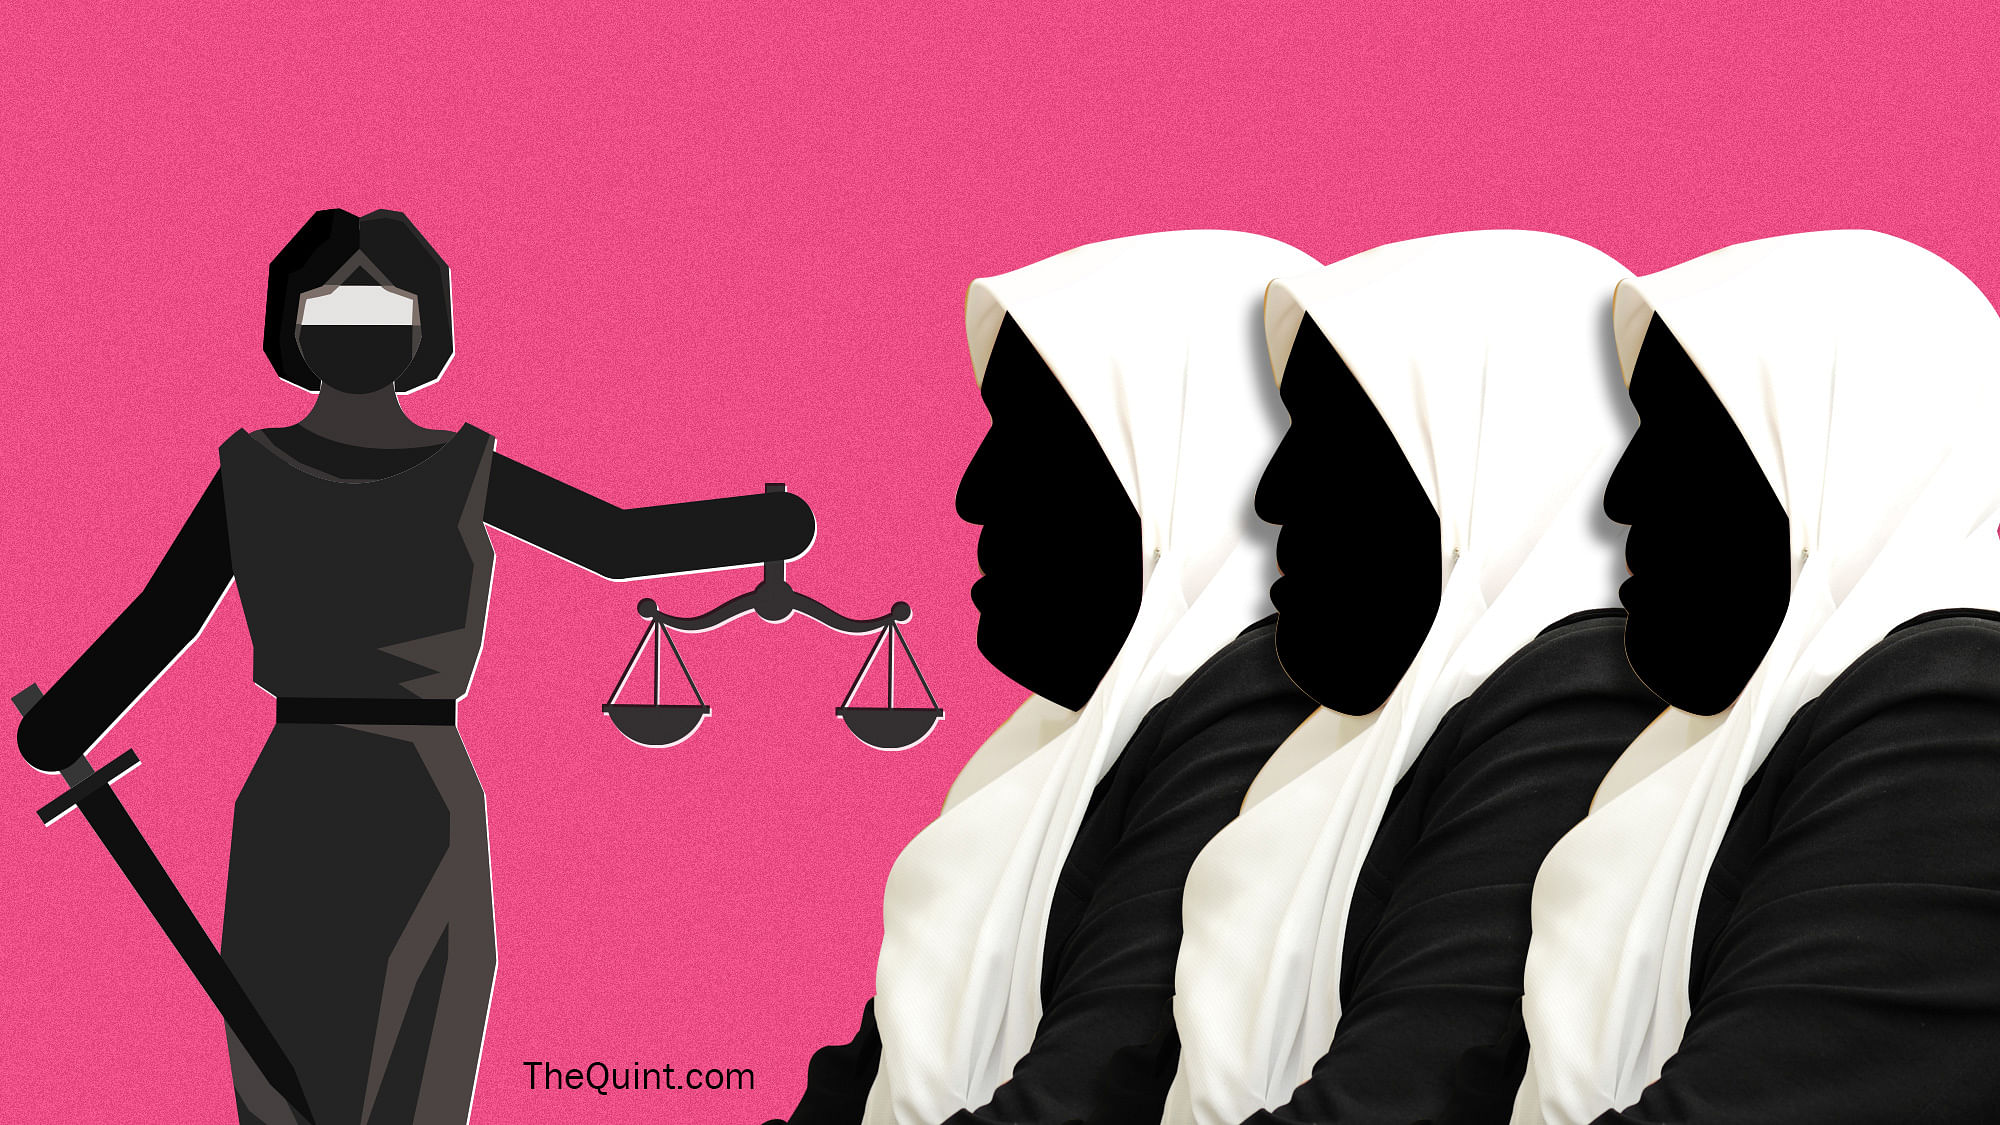 Giving instant triple talaq will be illegal and void and will attract a jail term of three years for the husband, according to a draft law. 